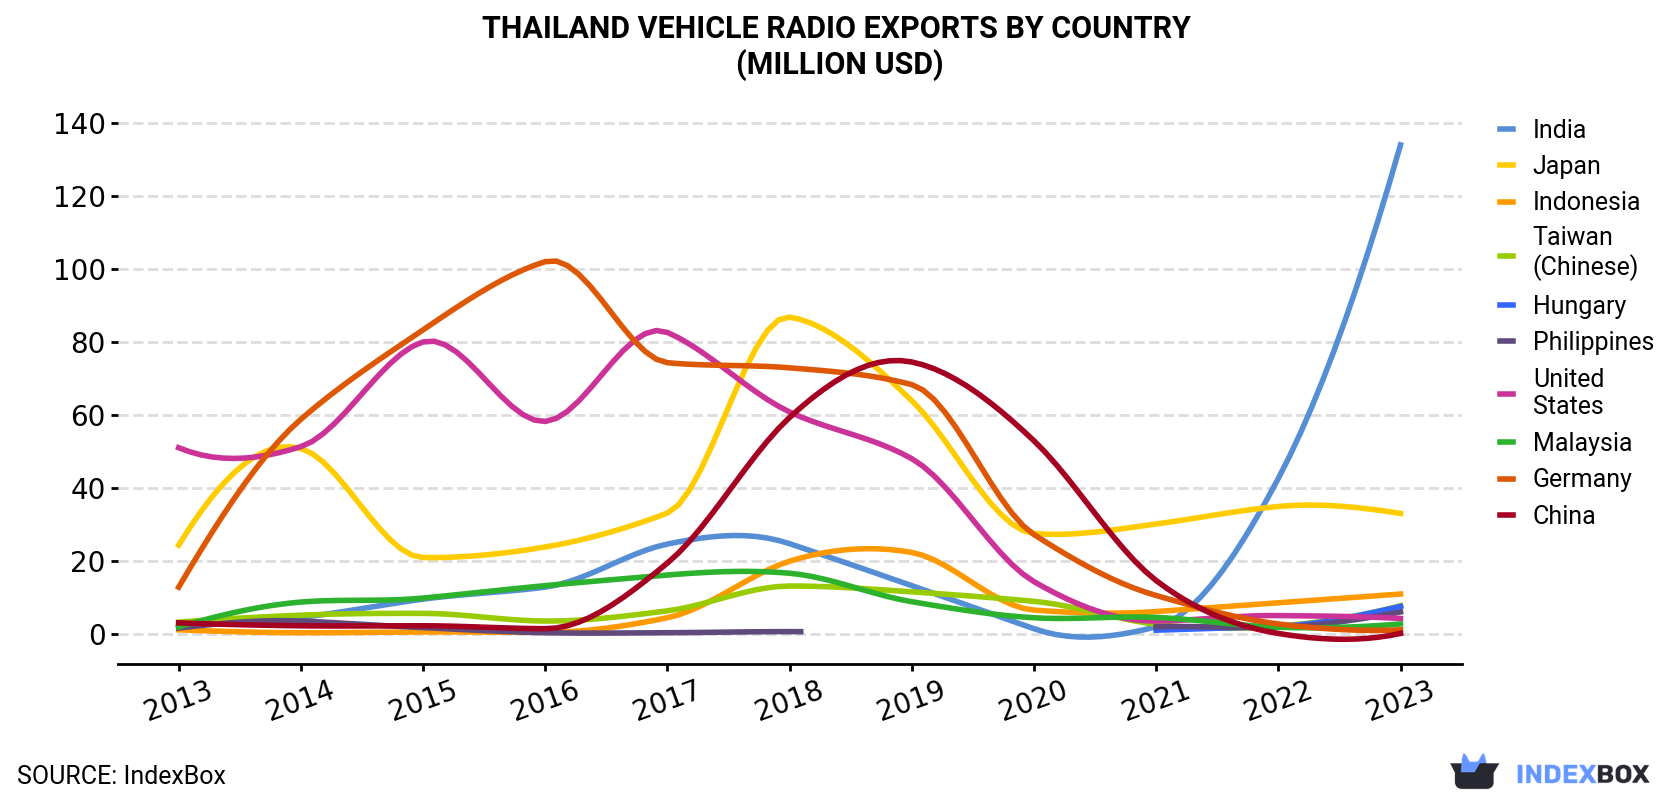 Thailand Vehicle Radio Exports By Country (Million USD)